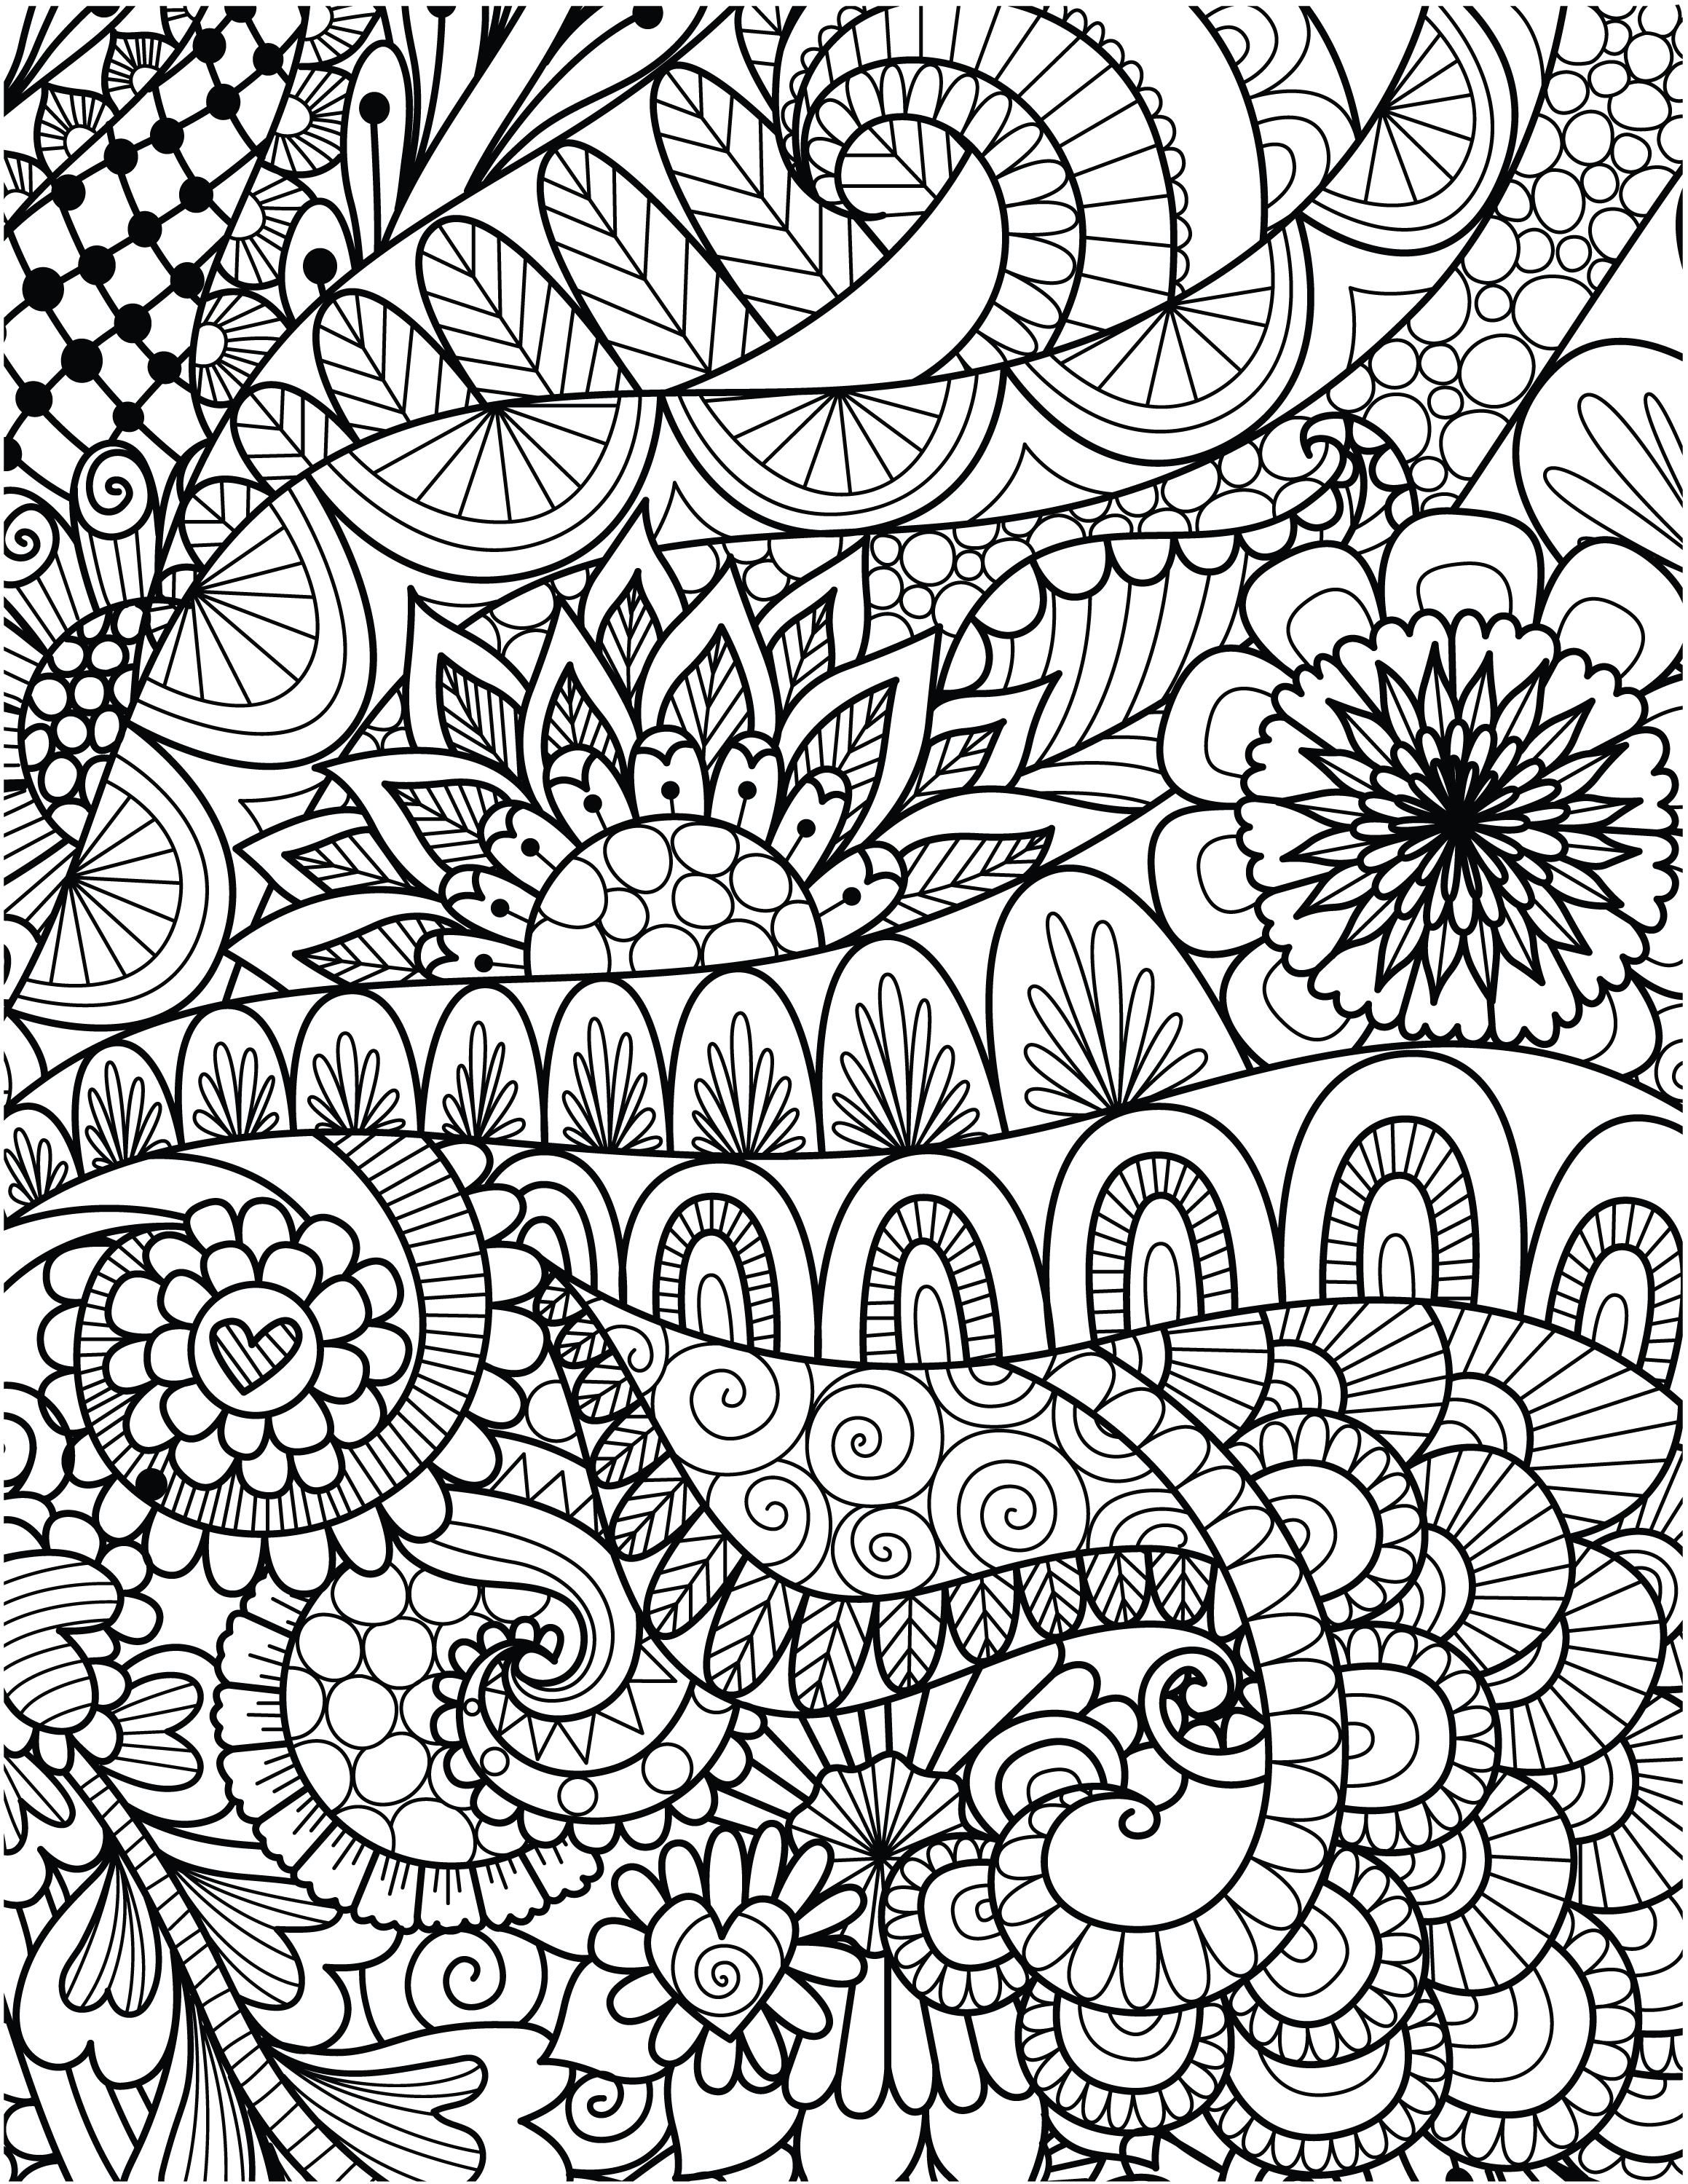 Zentangle Scenery Coloring Page Printable -  Portugal